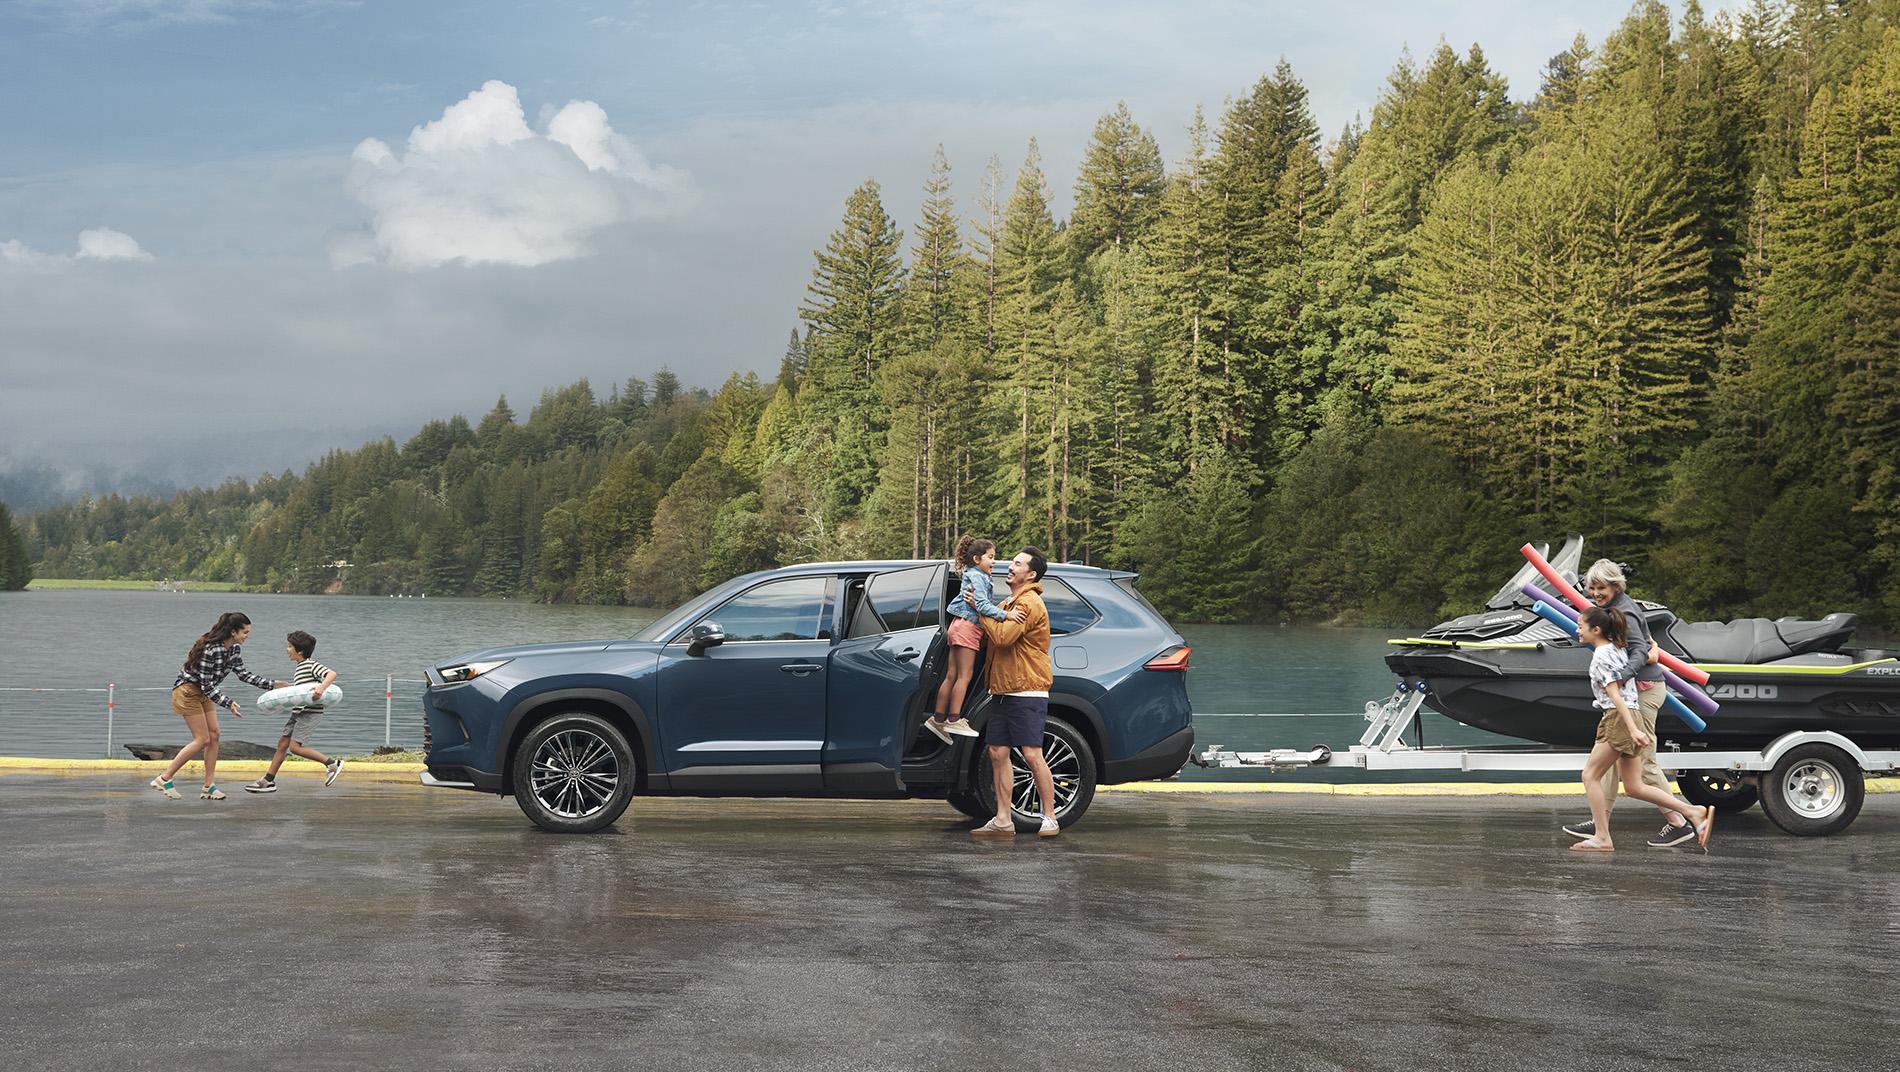 Toyota SUV towing 2 jet skis in front of a lake that is surrounded by evergreen trees. Family getting out of the vehicle while kids play.